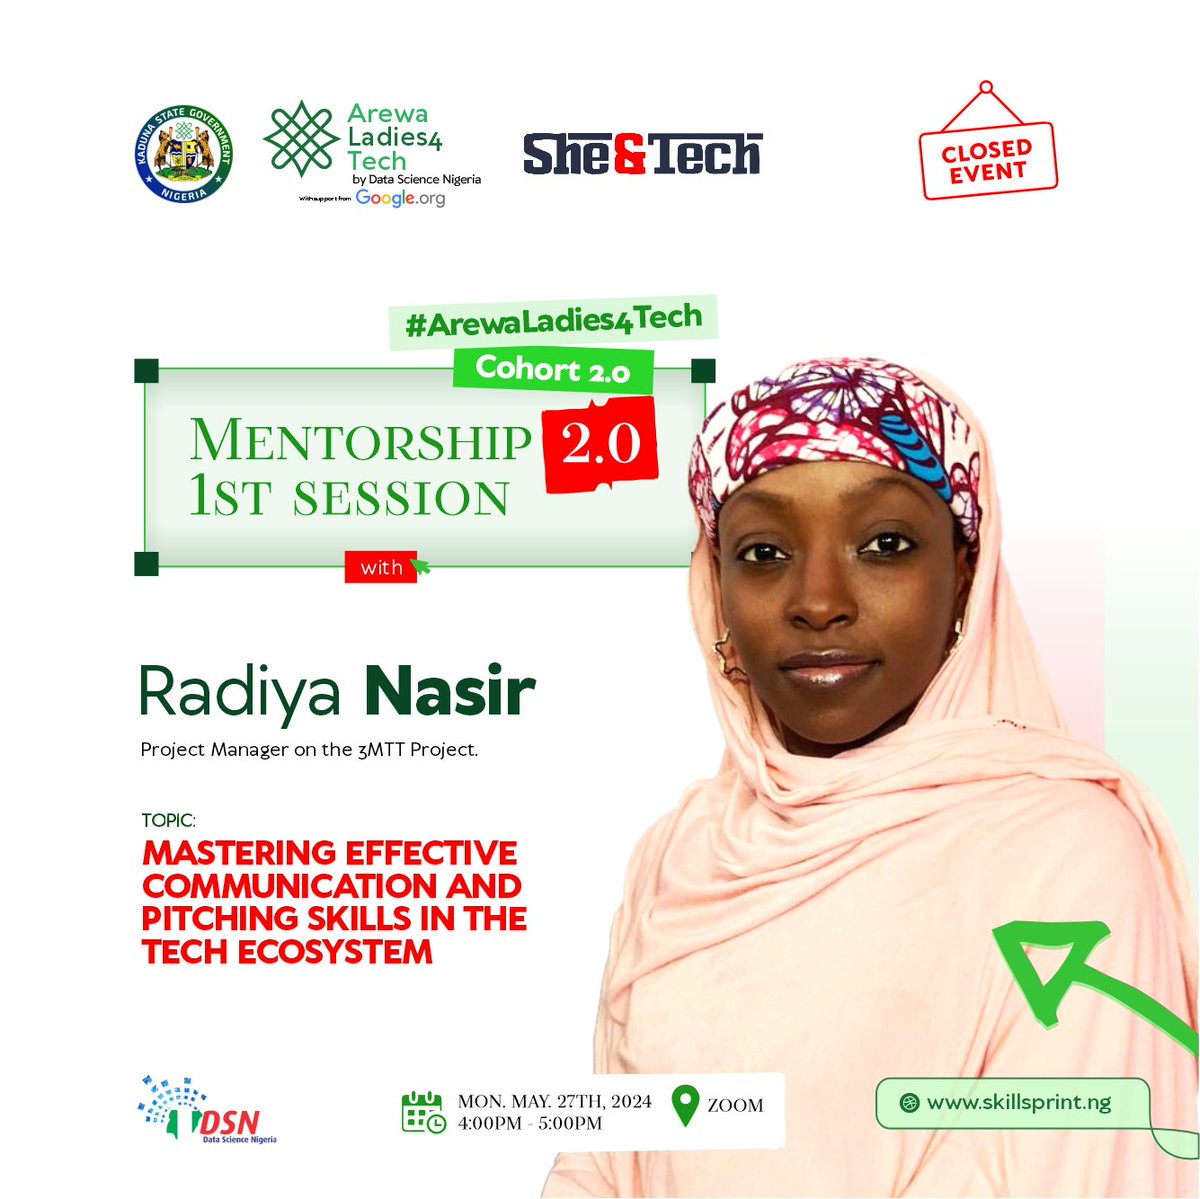 Hello #ArewaLadies4Tech Cohort 2.0 participants! Our 2nd mentorship session is on Monday, 27th May 2024. Join Radiya Nasir, a project manager from @NITDANigeria to learn 'Mastering Effective Communication and Pitching Skills in Tech.' Time: 4:00-5:00 PM.